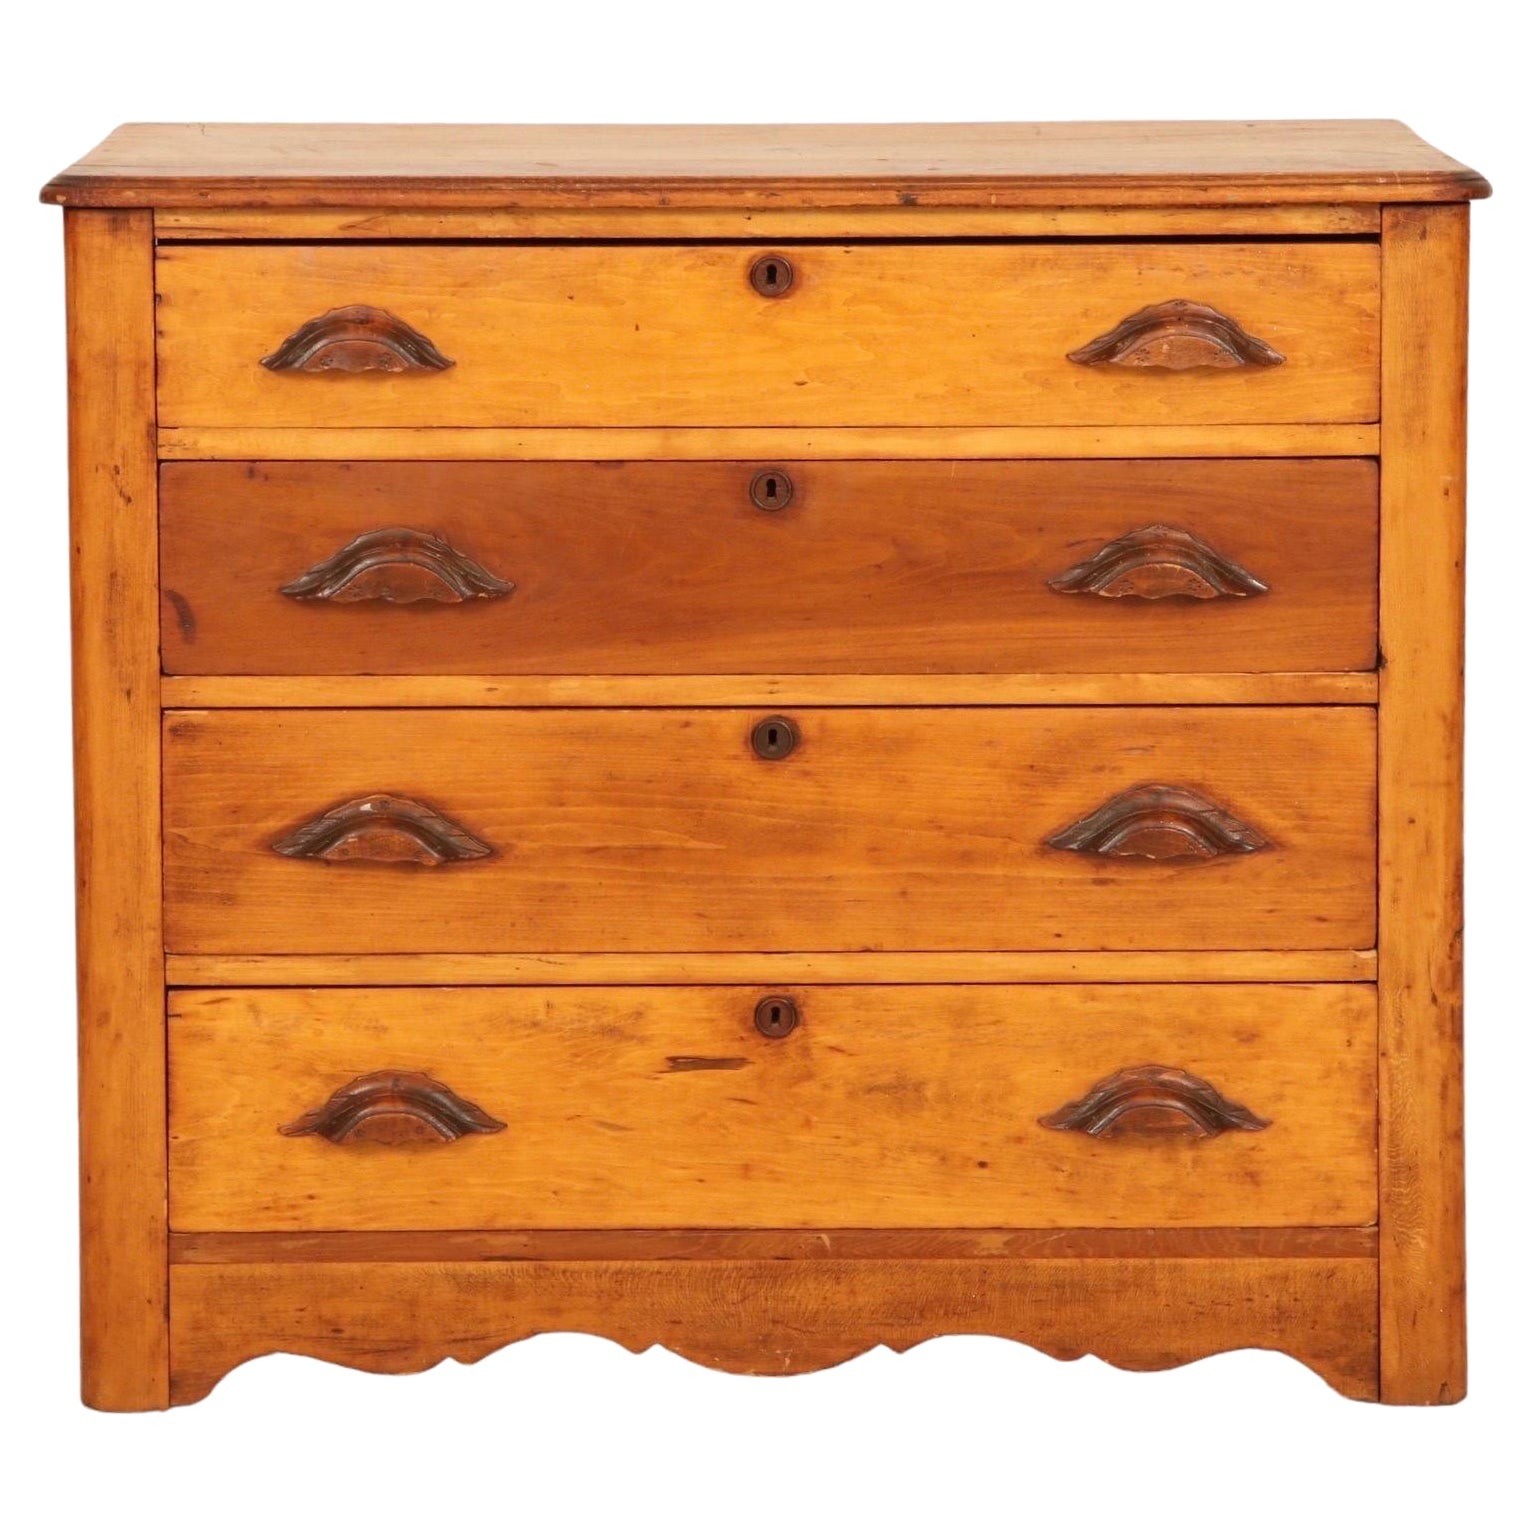 Antique Provincial Chest of Drawers